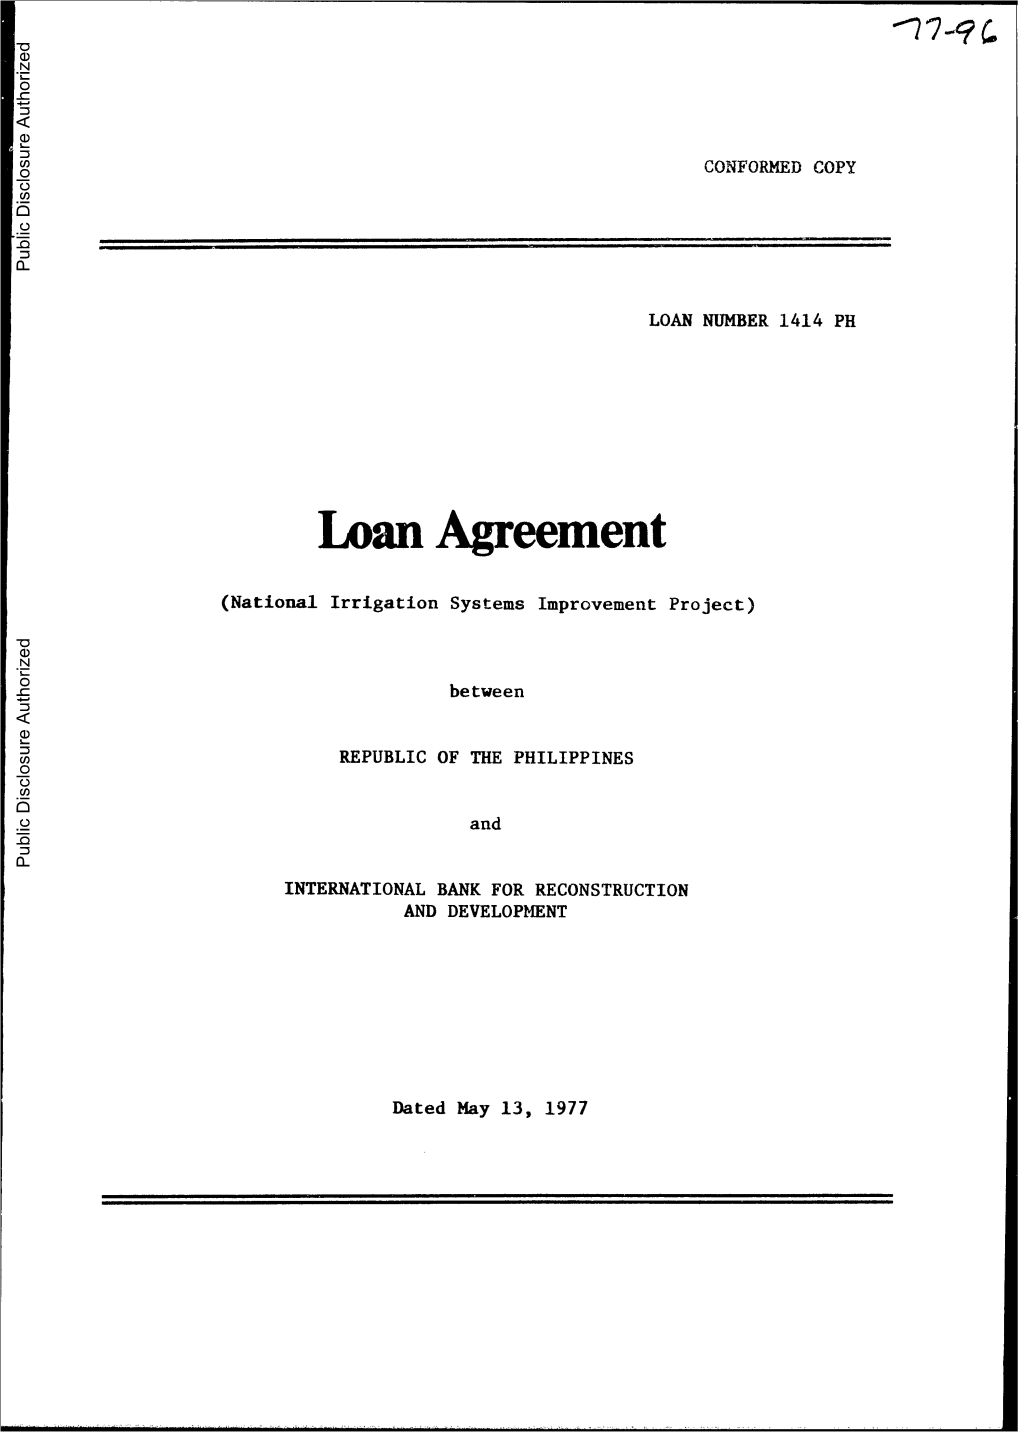 Loan Agreement Public Disclosure Authorized (National Irrigation Systems Improvement Project)